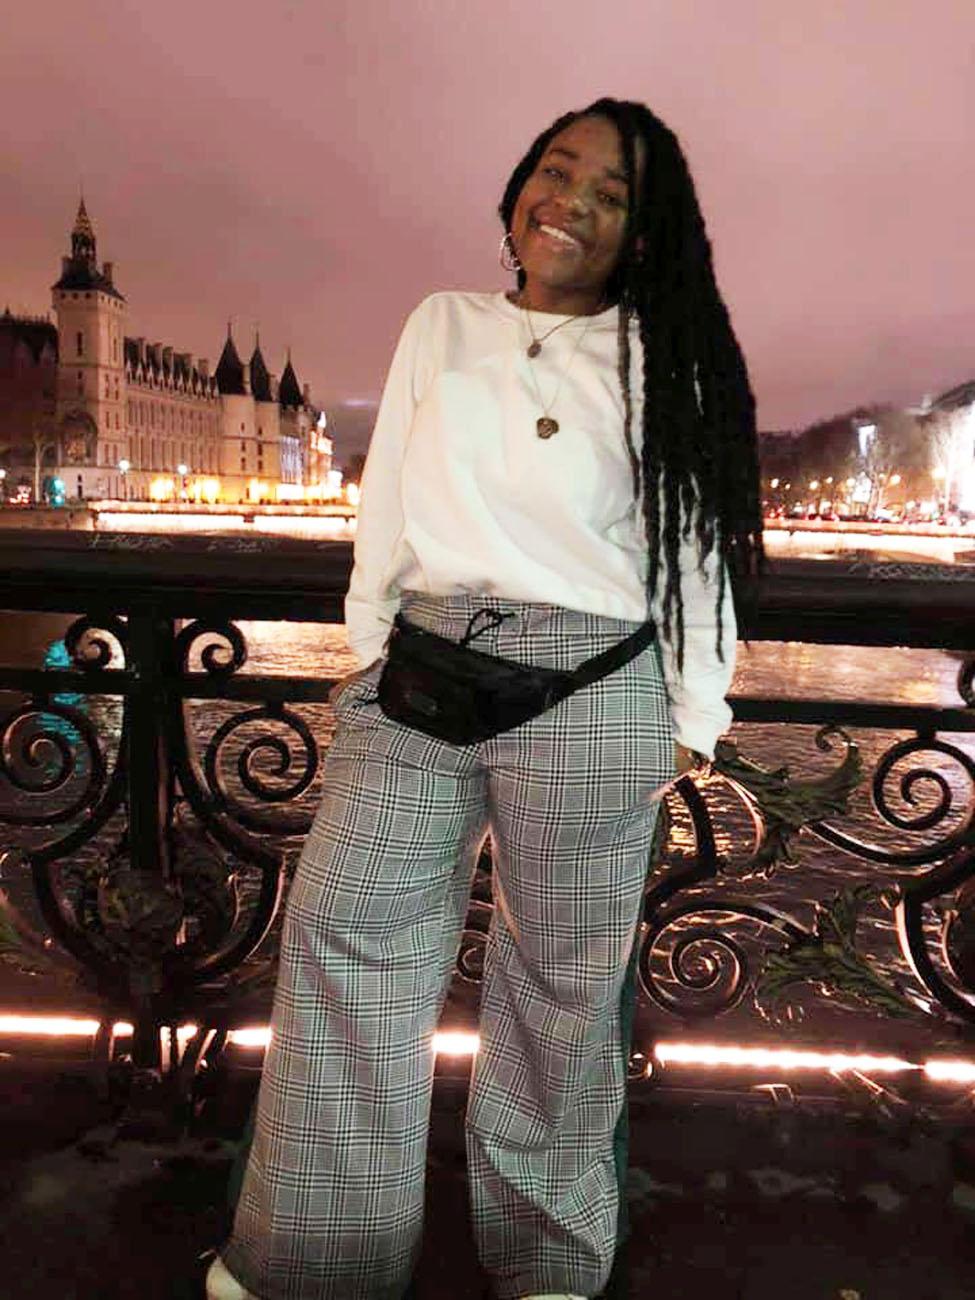 Lubin student Geanina Riley '21 standing next to cast-iron railing over a river in Paris with a chateau in the backgrond during her semester abroad in France